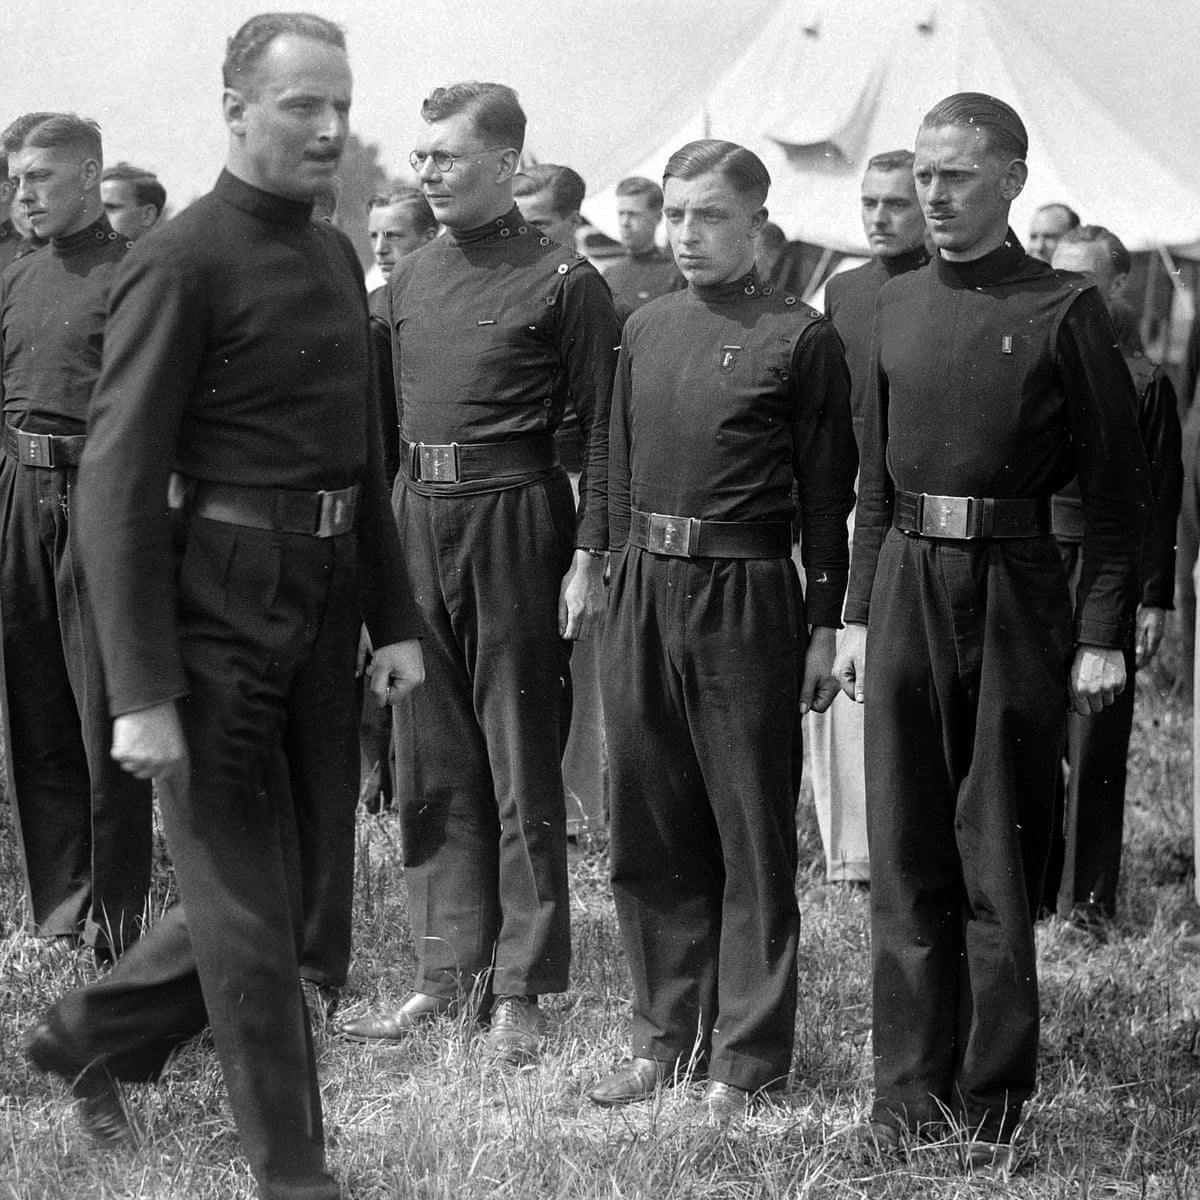 British fascist Oswald Mosley and HIS followers wore black.